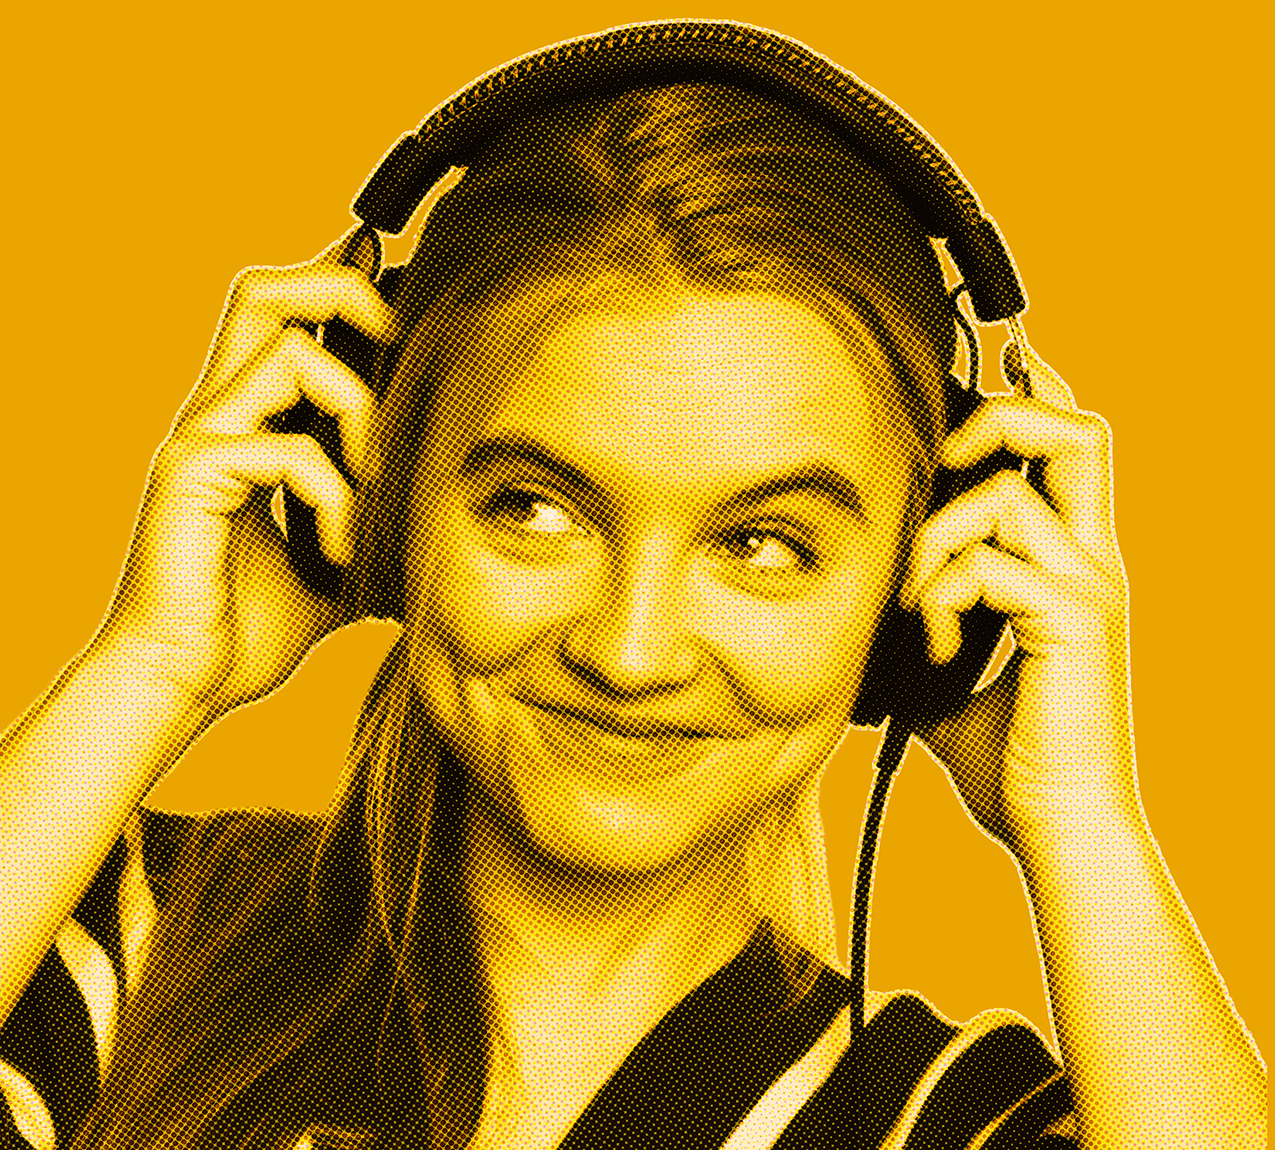 Yellow filtered picture of woman's head smiling looking to the side while wearing and holding headphones with her hands